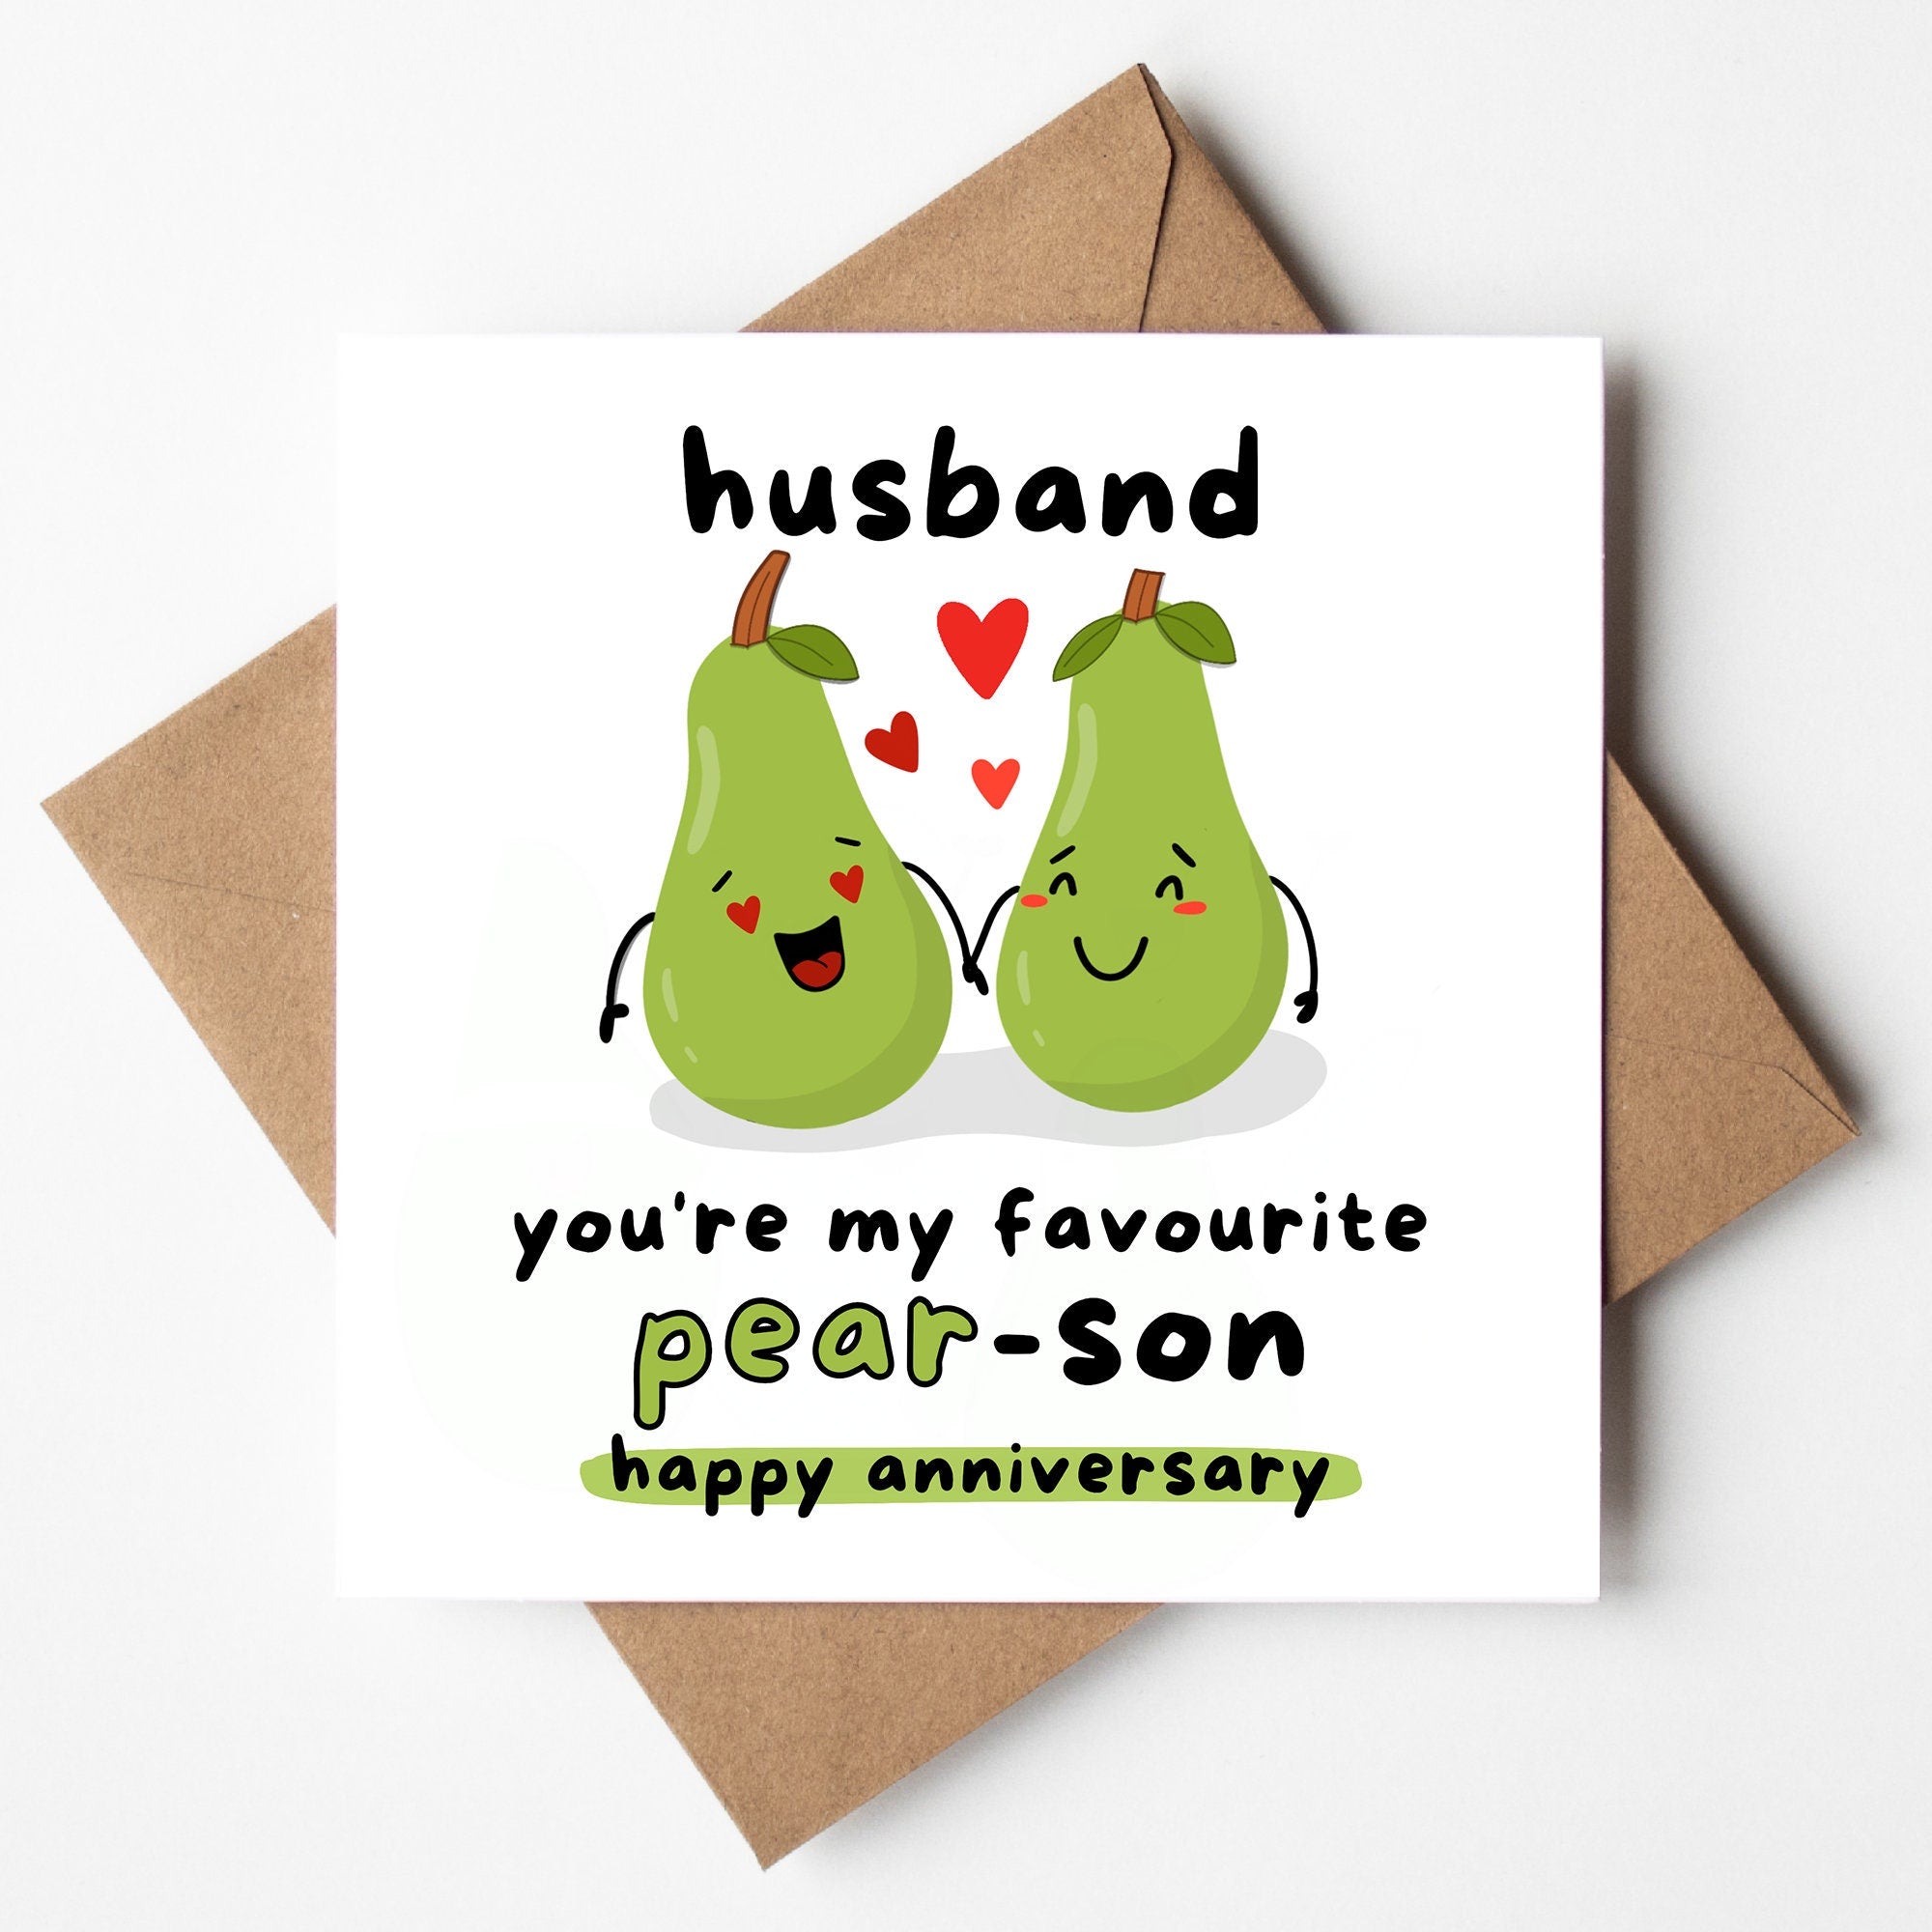 Husband Anniversary Card - Husband You're My Favourite Pear-son